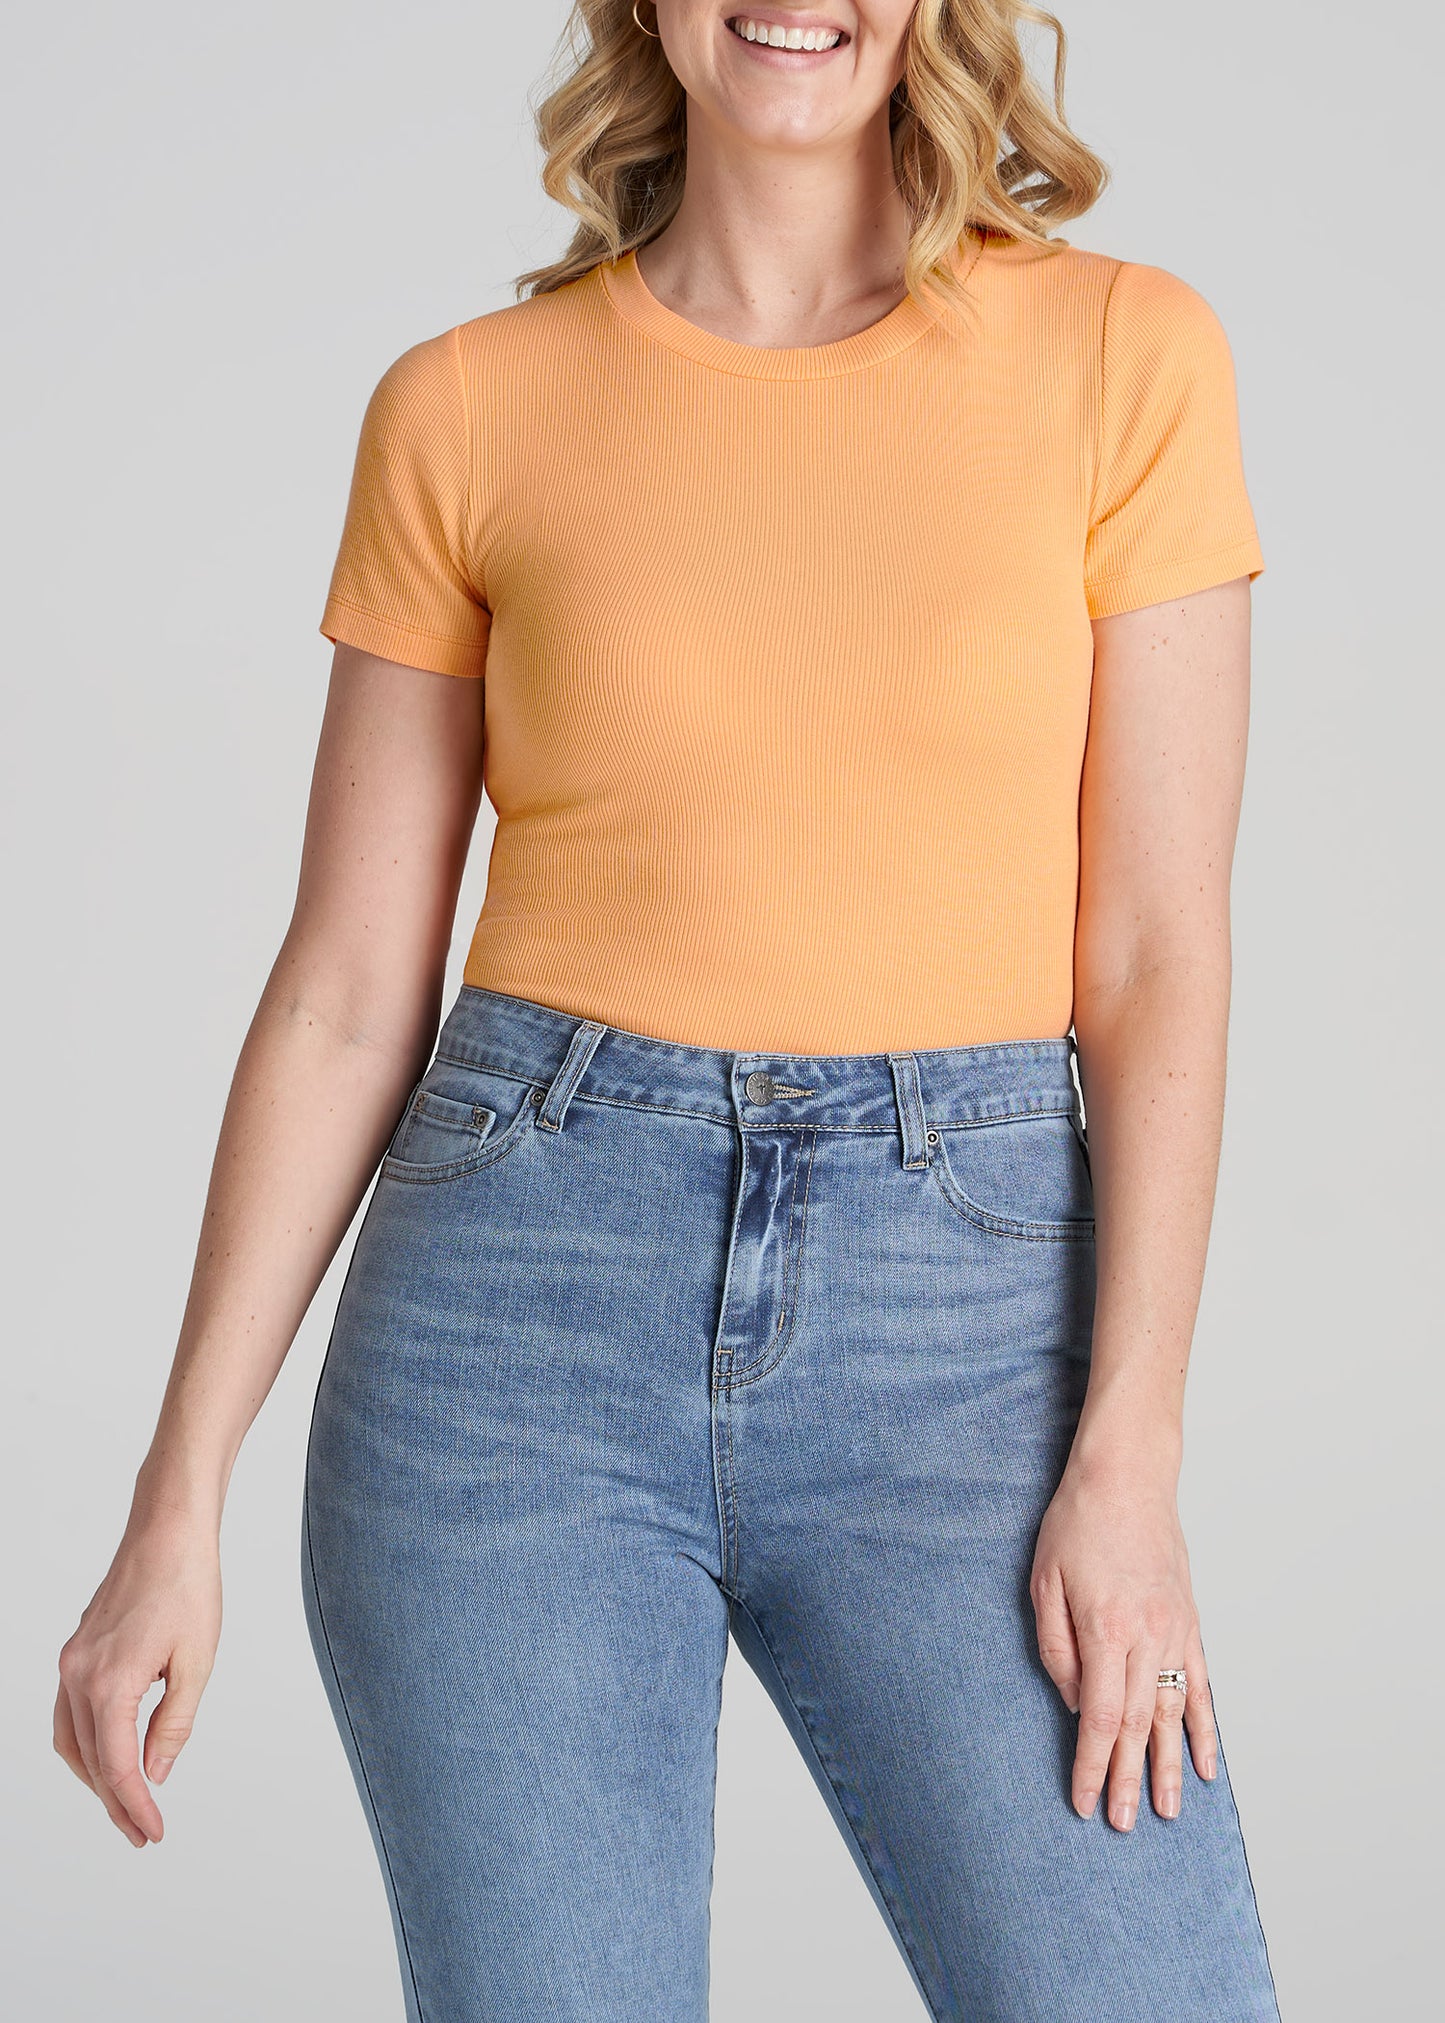 Clementine Short Sleeve Ribbed Tee